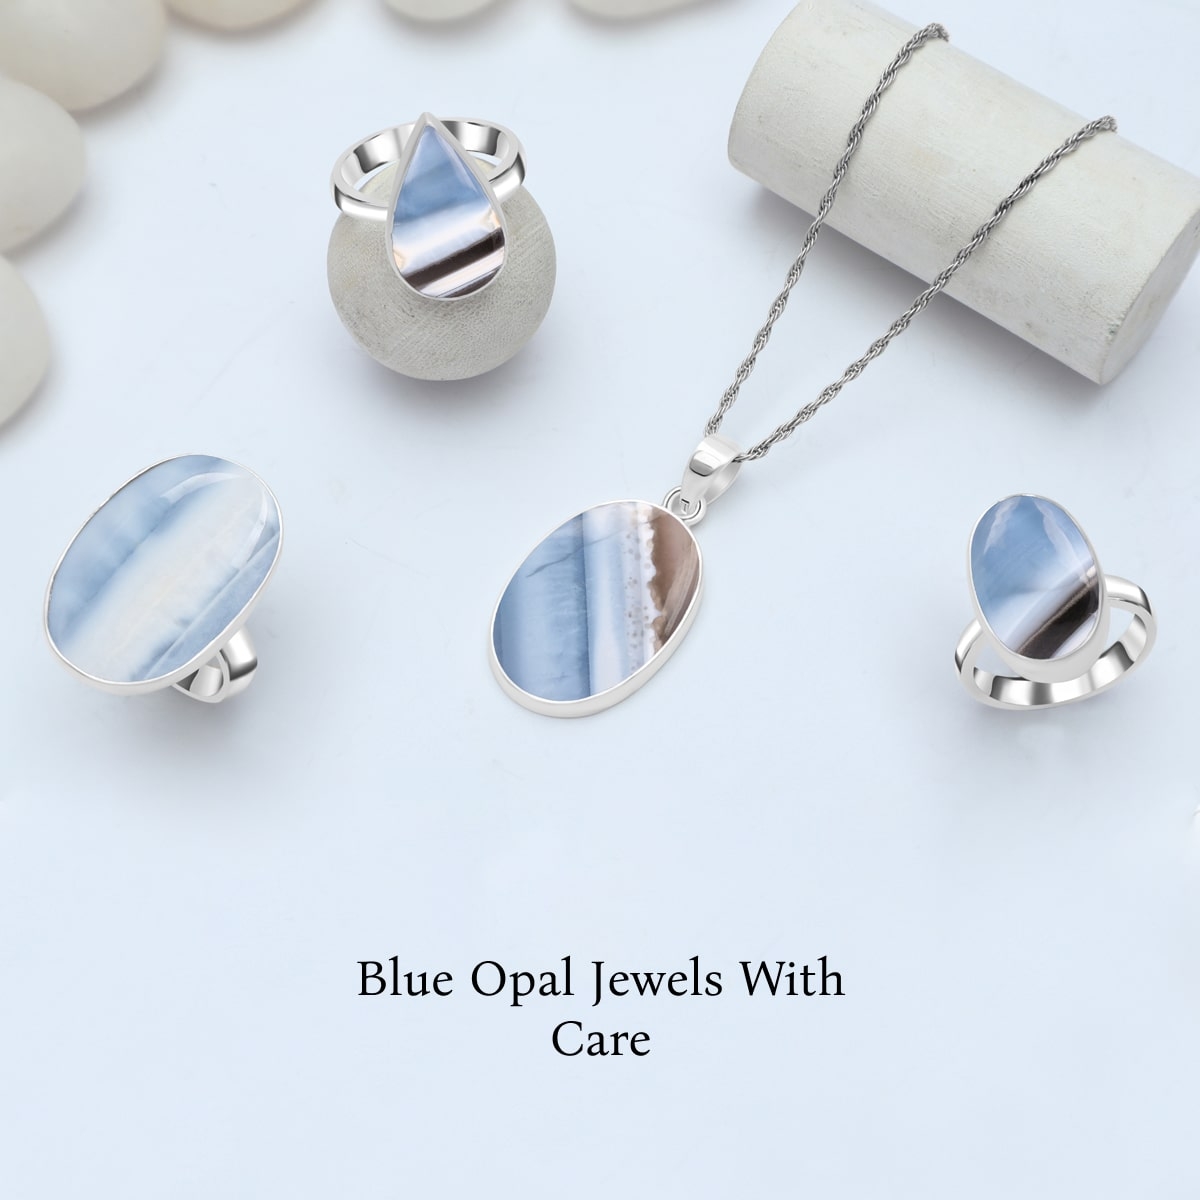 How to Recharge Your Blue Opal Jewelry